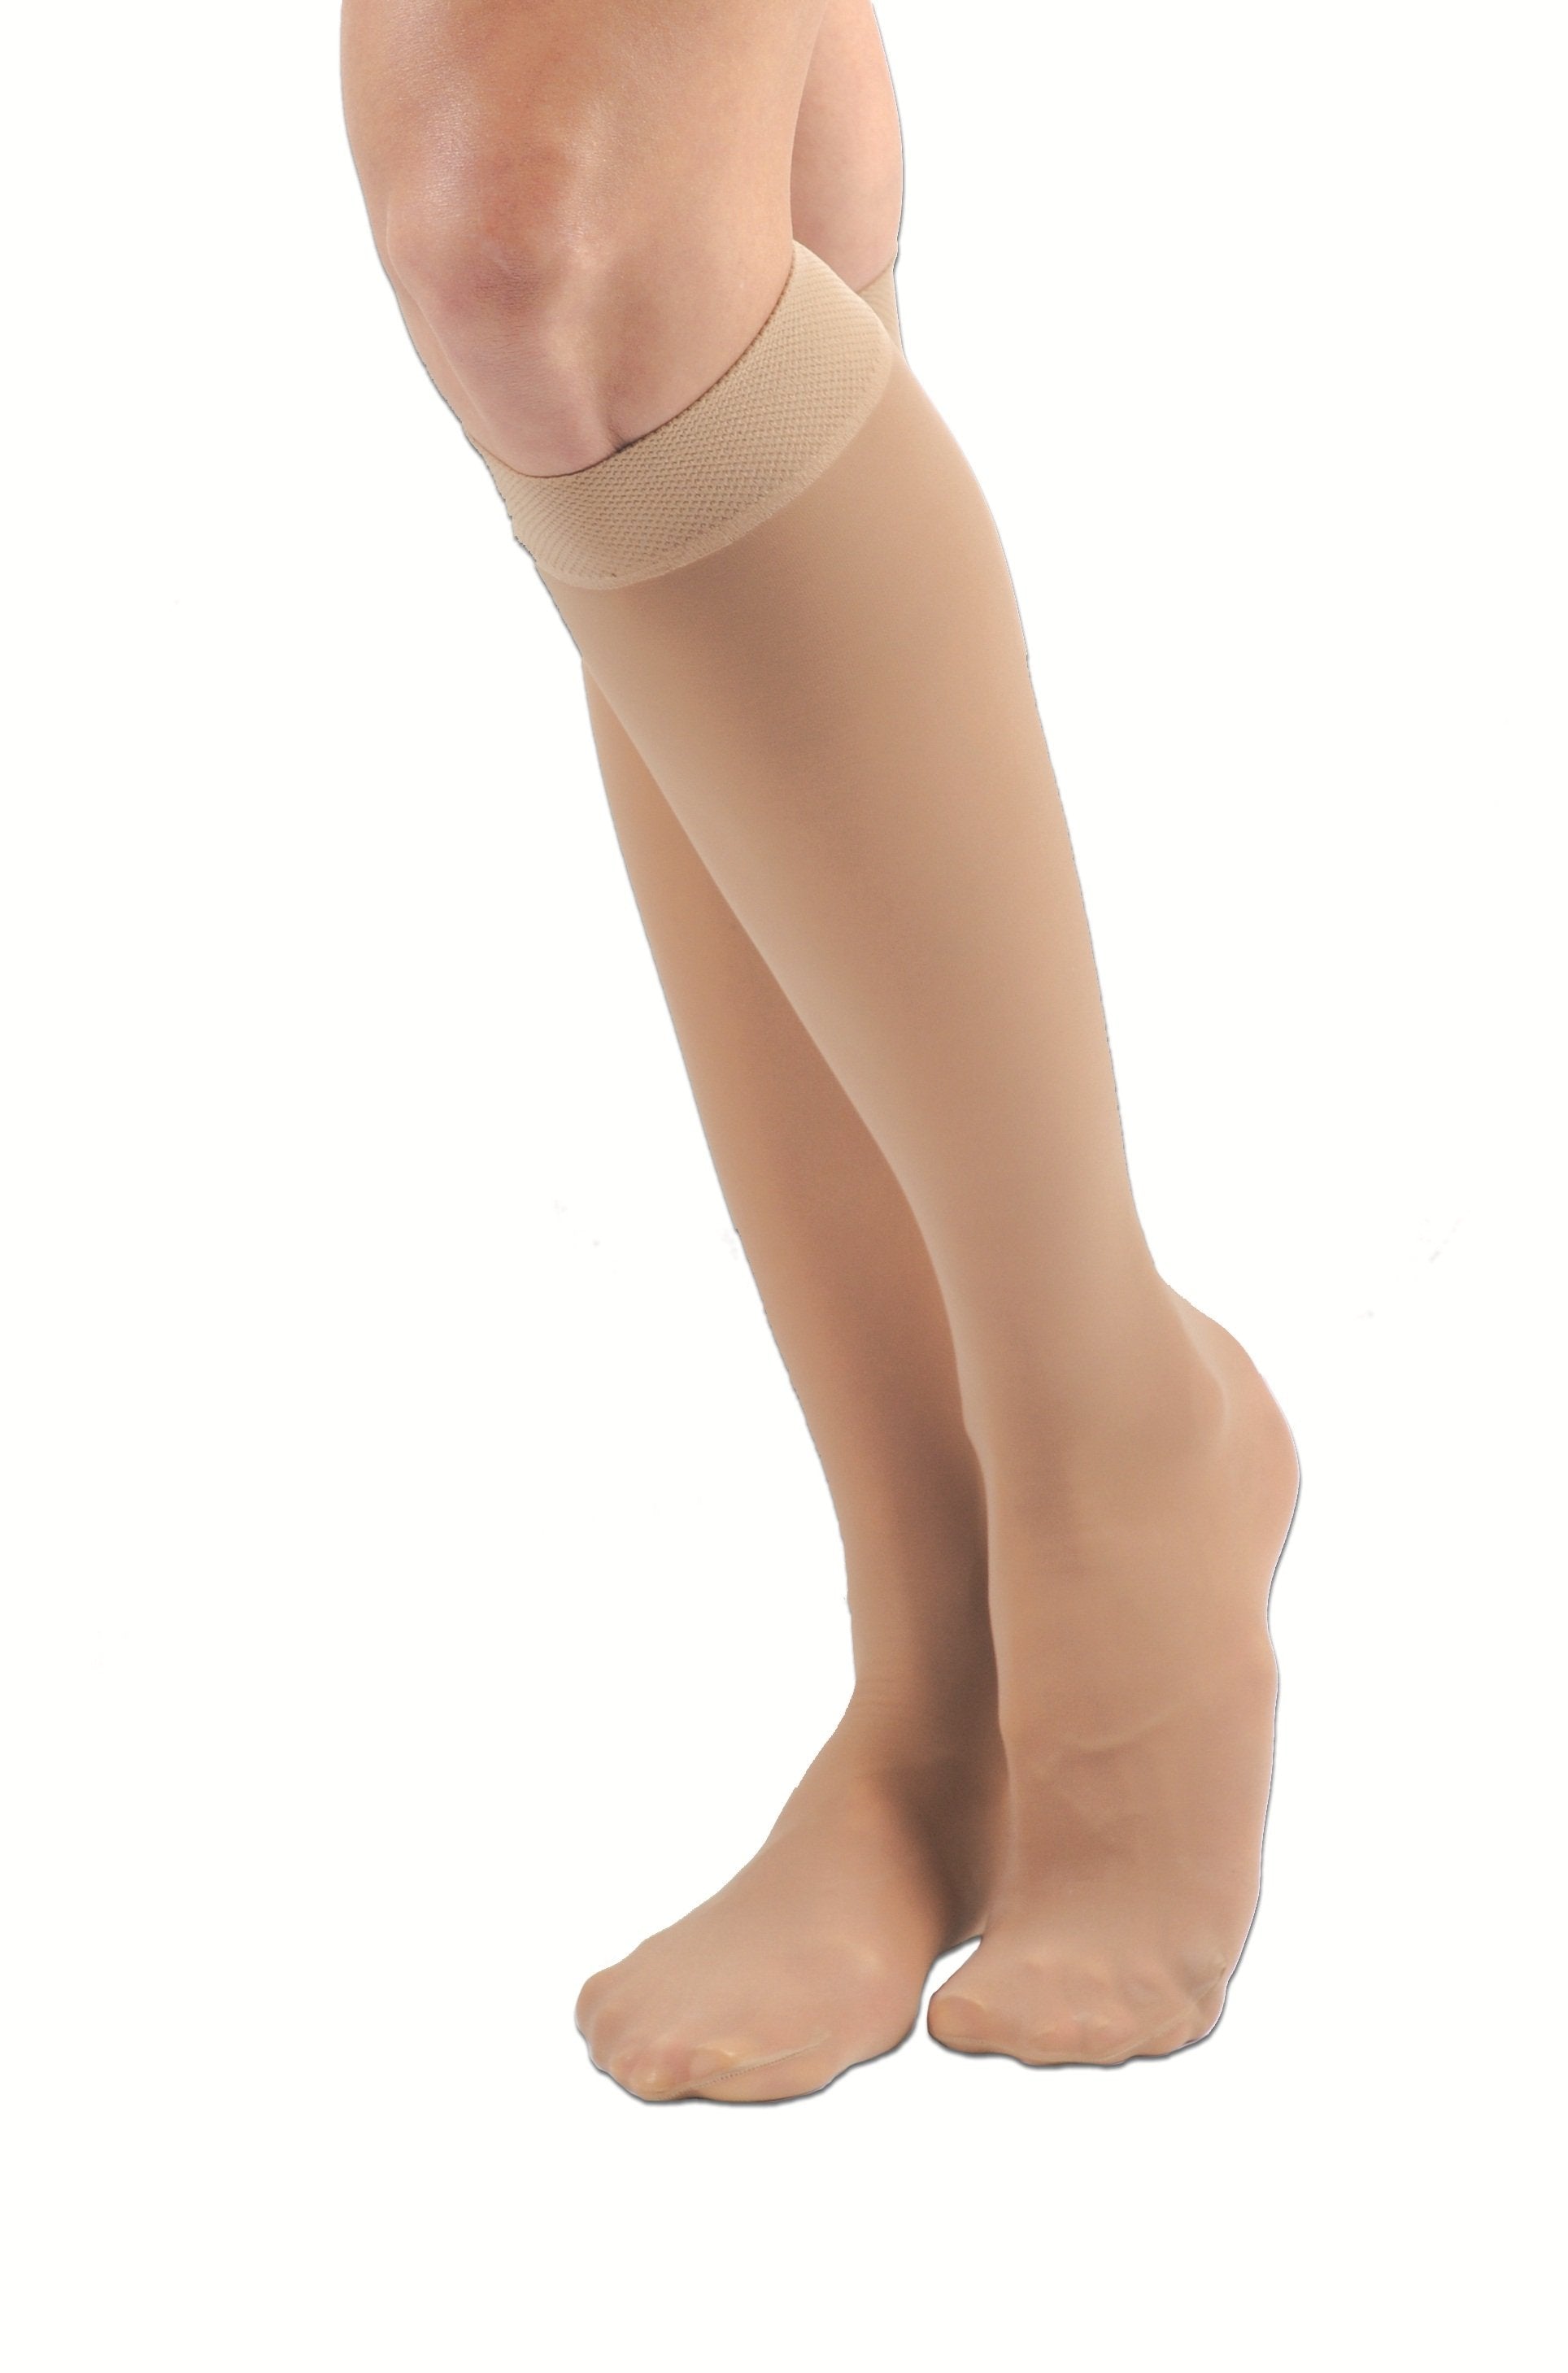 Closed Toe Knee High Nude Compression Stockings - M&H Uniforms